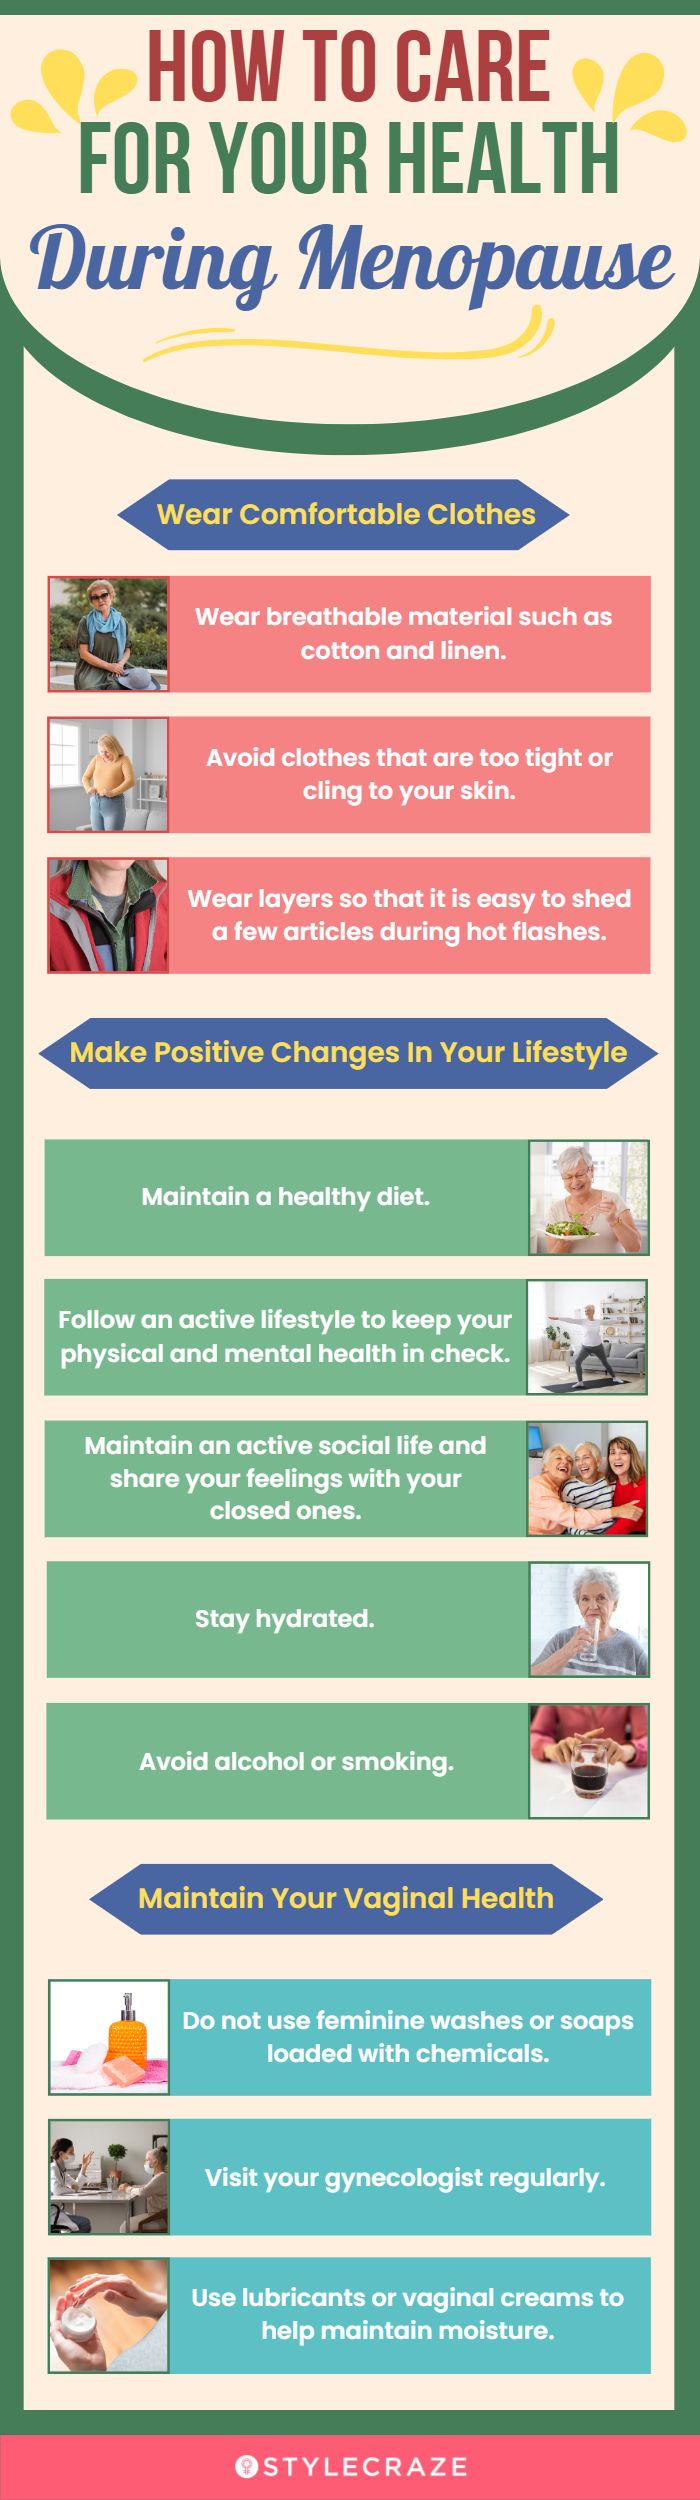 How To Care For Your Health During Menopause (infographic)